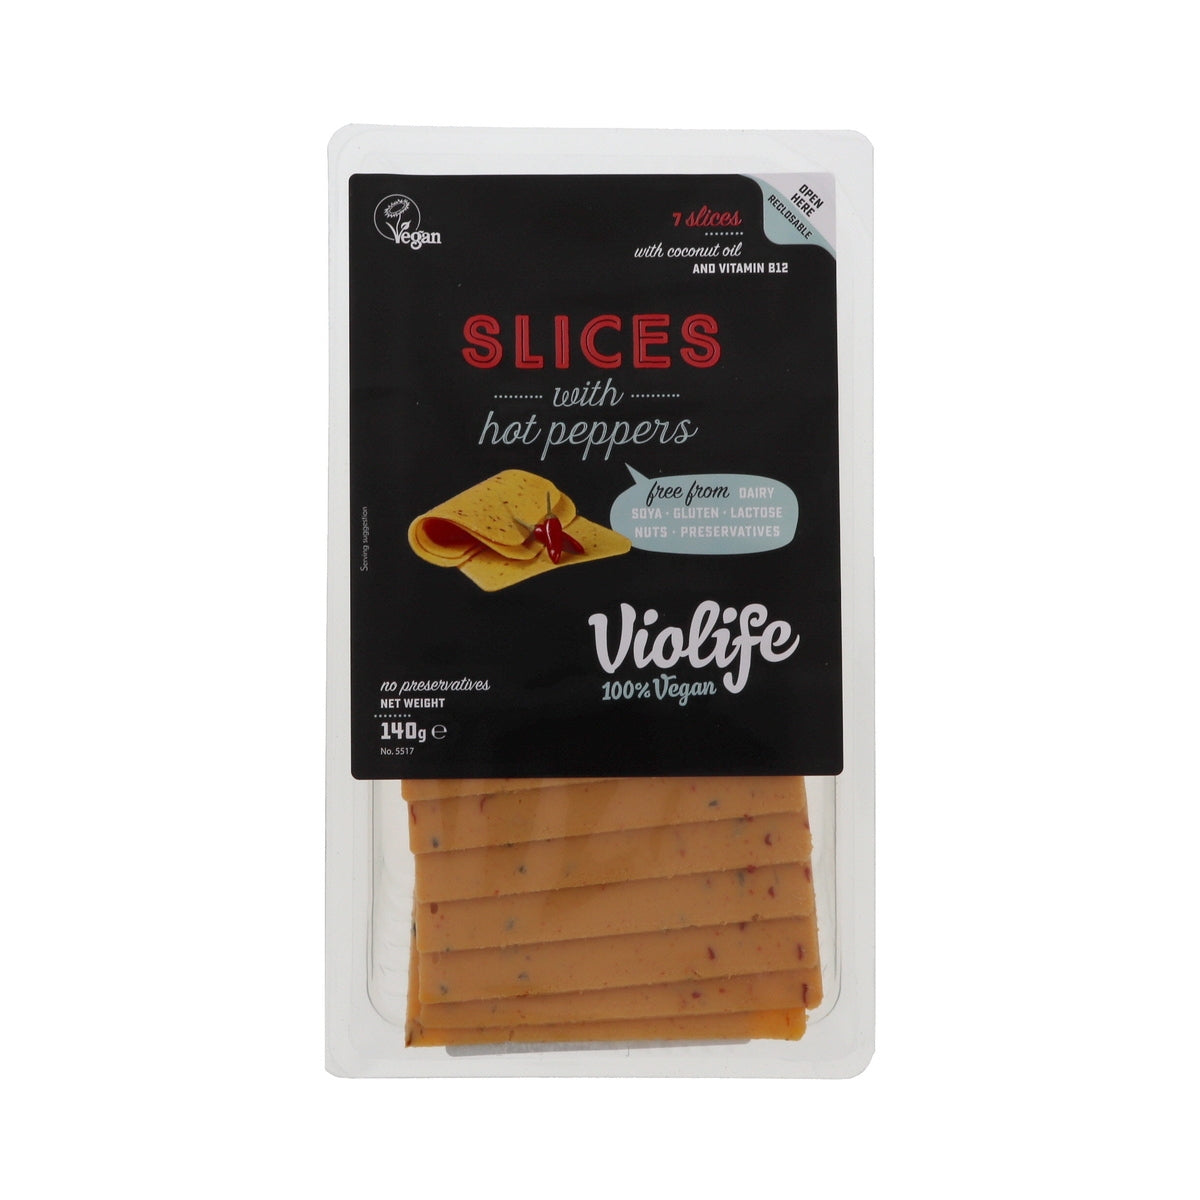 VIOLIFE Slices With Hot Peppers, 140g